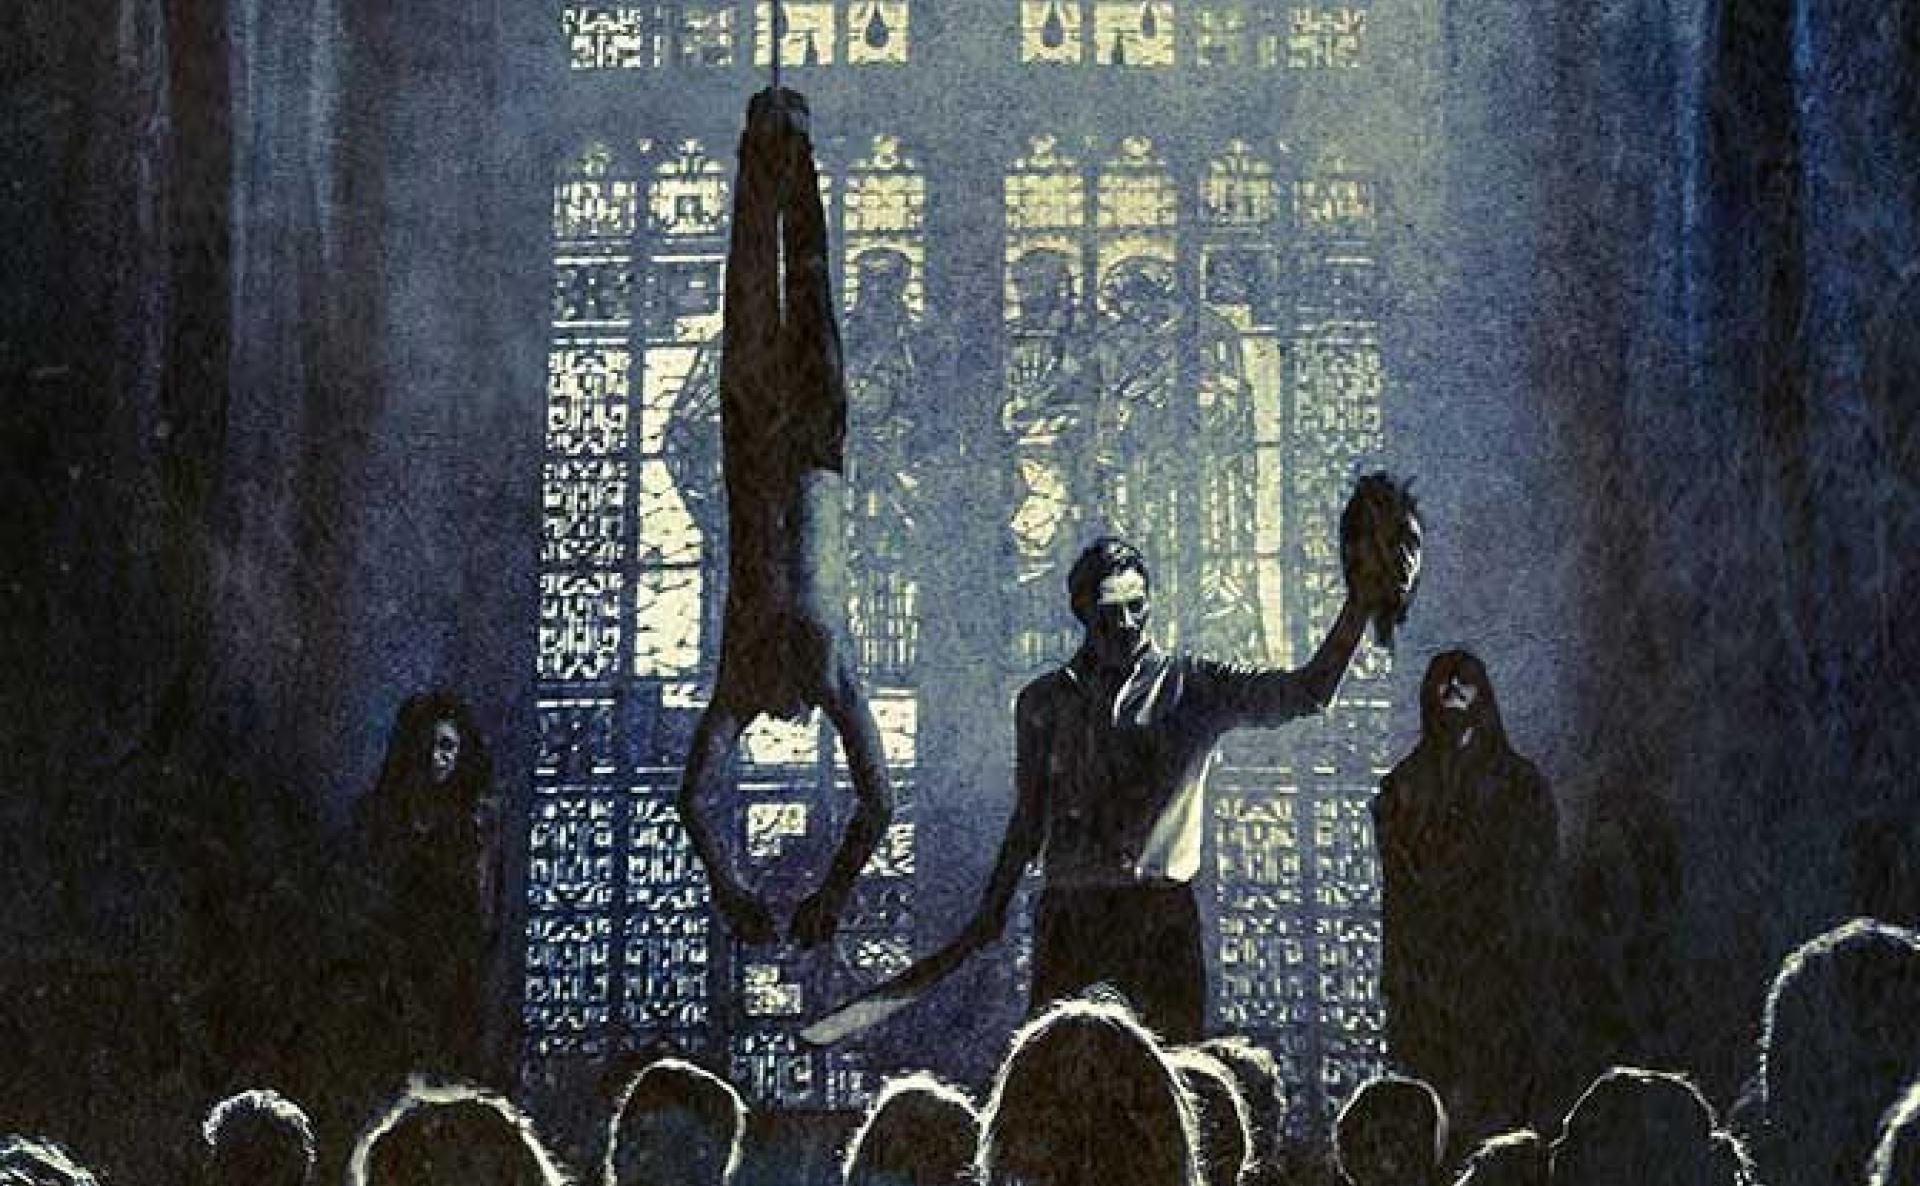 Group of people in a religious building looking at one man standing on higher ground, preaching. Body hanging next to him.